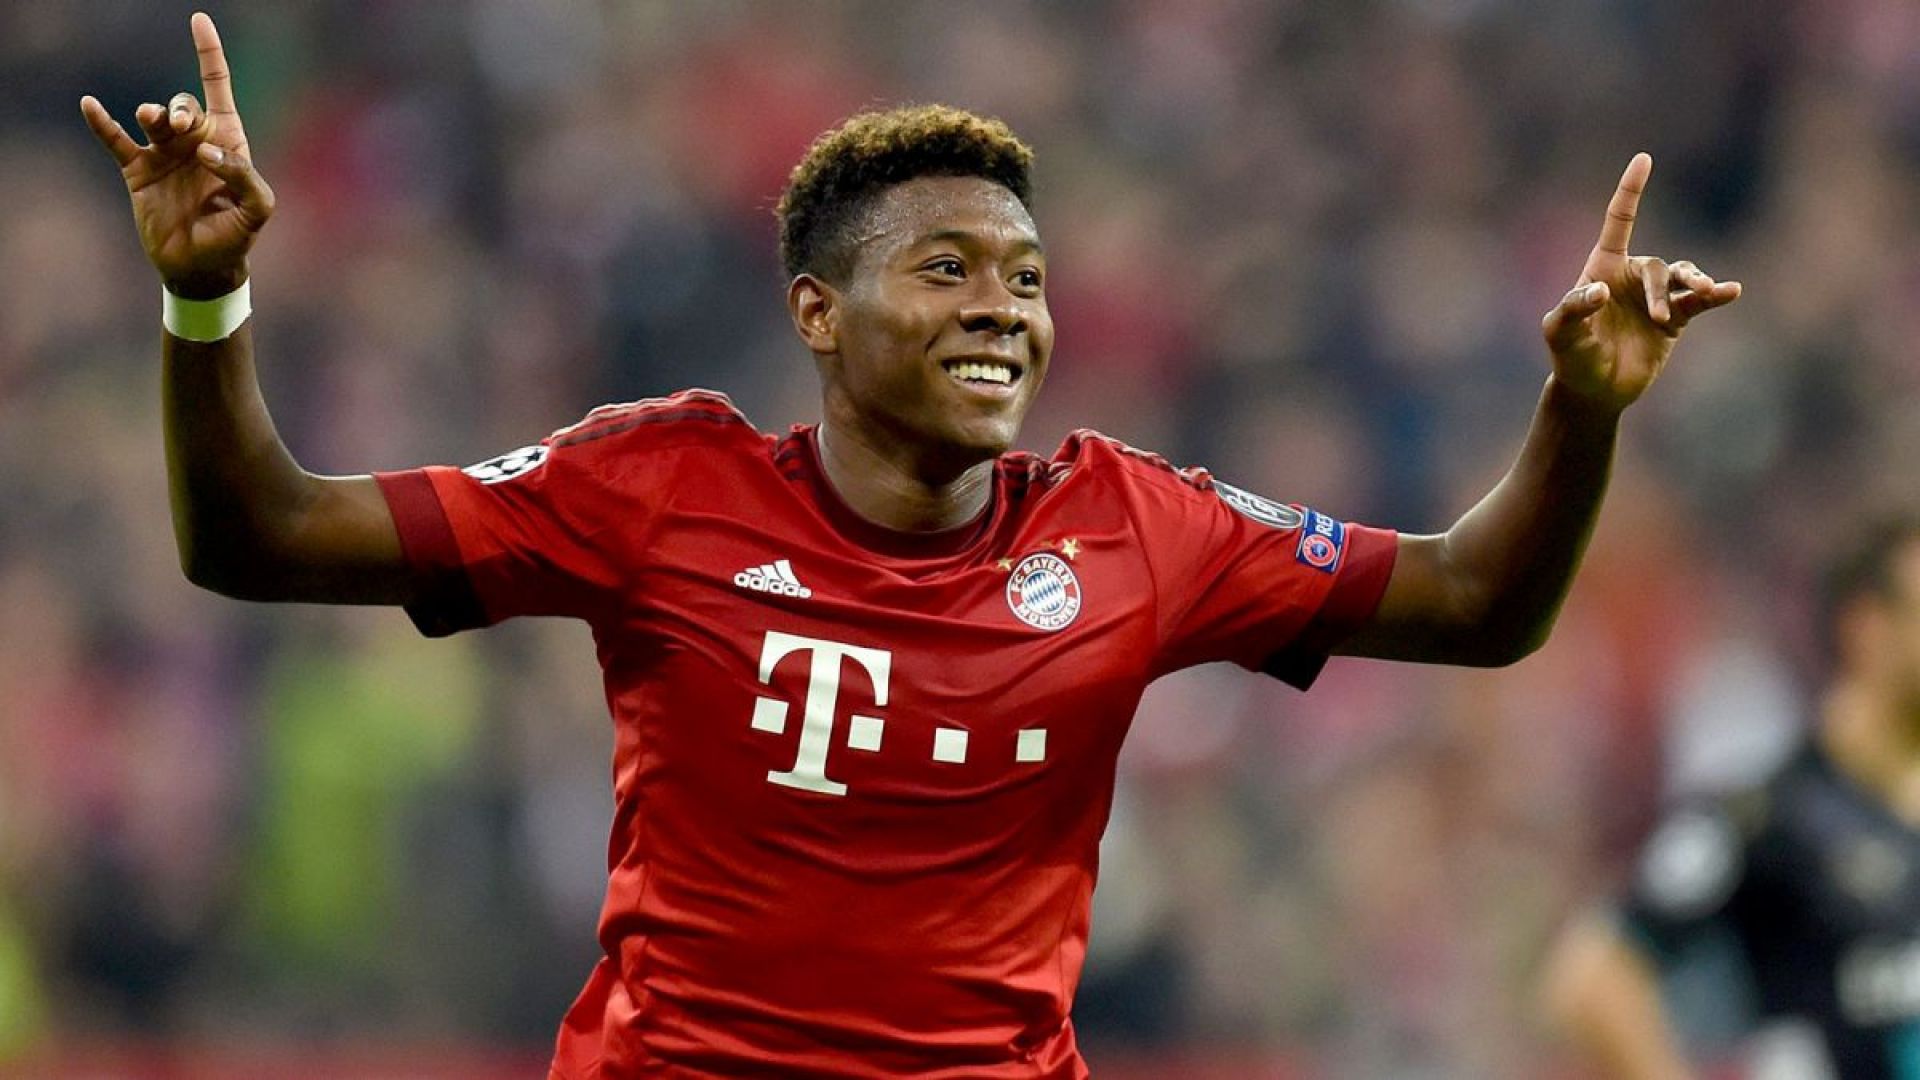 Manchester United target David Alaba is closing in on a move to Real Madrid